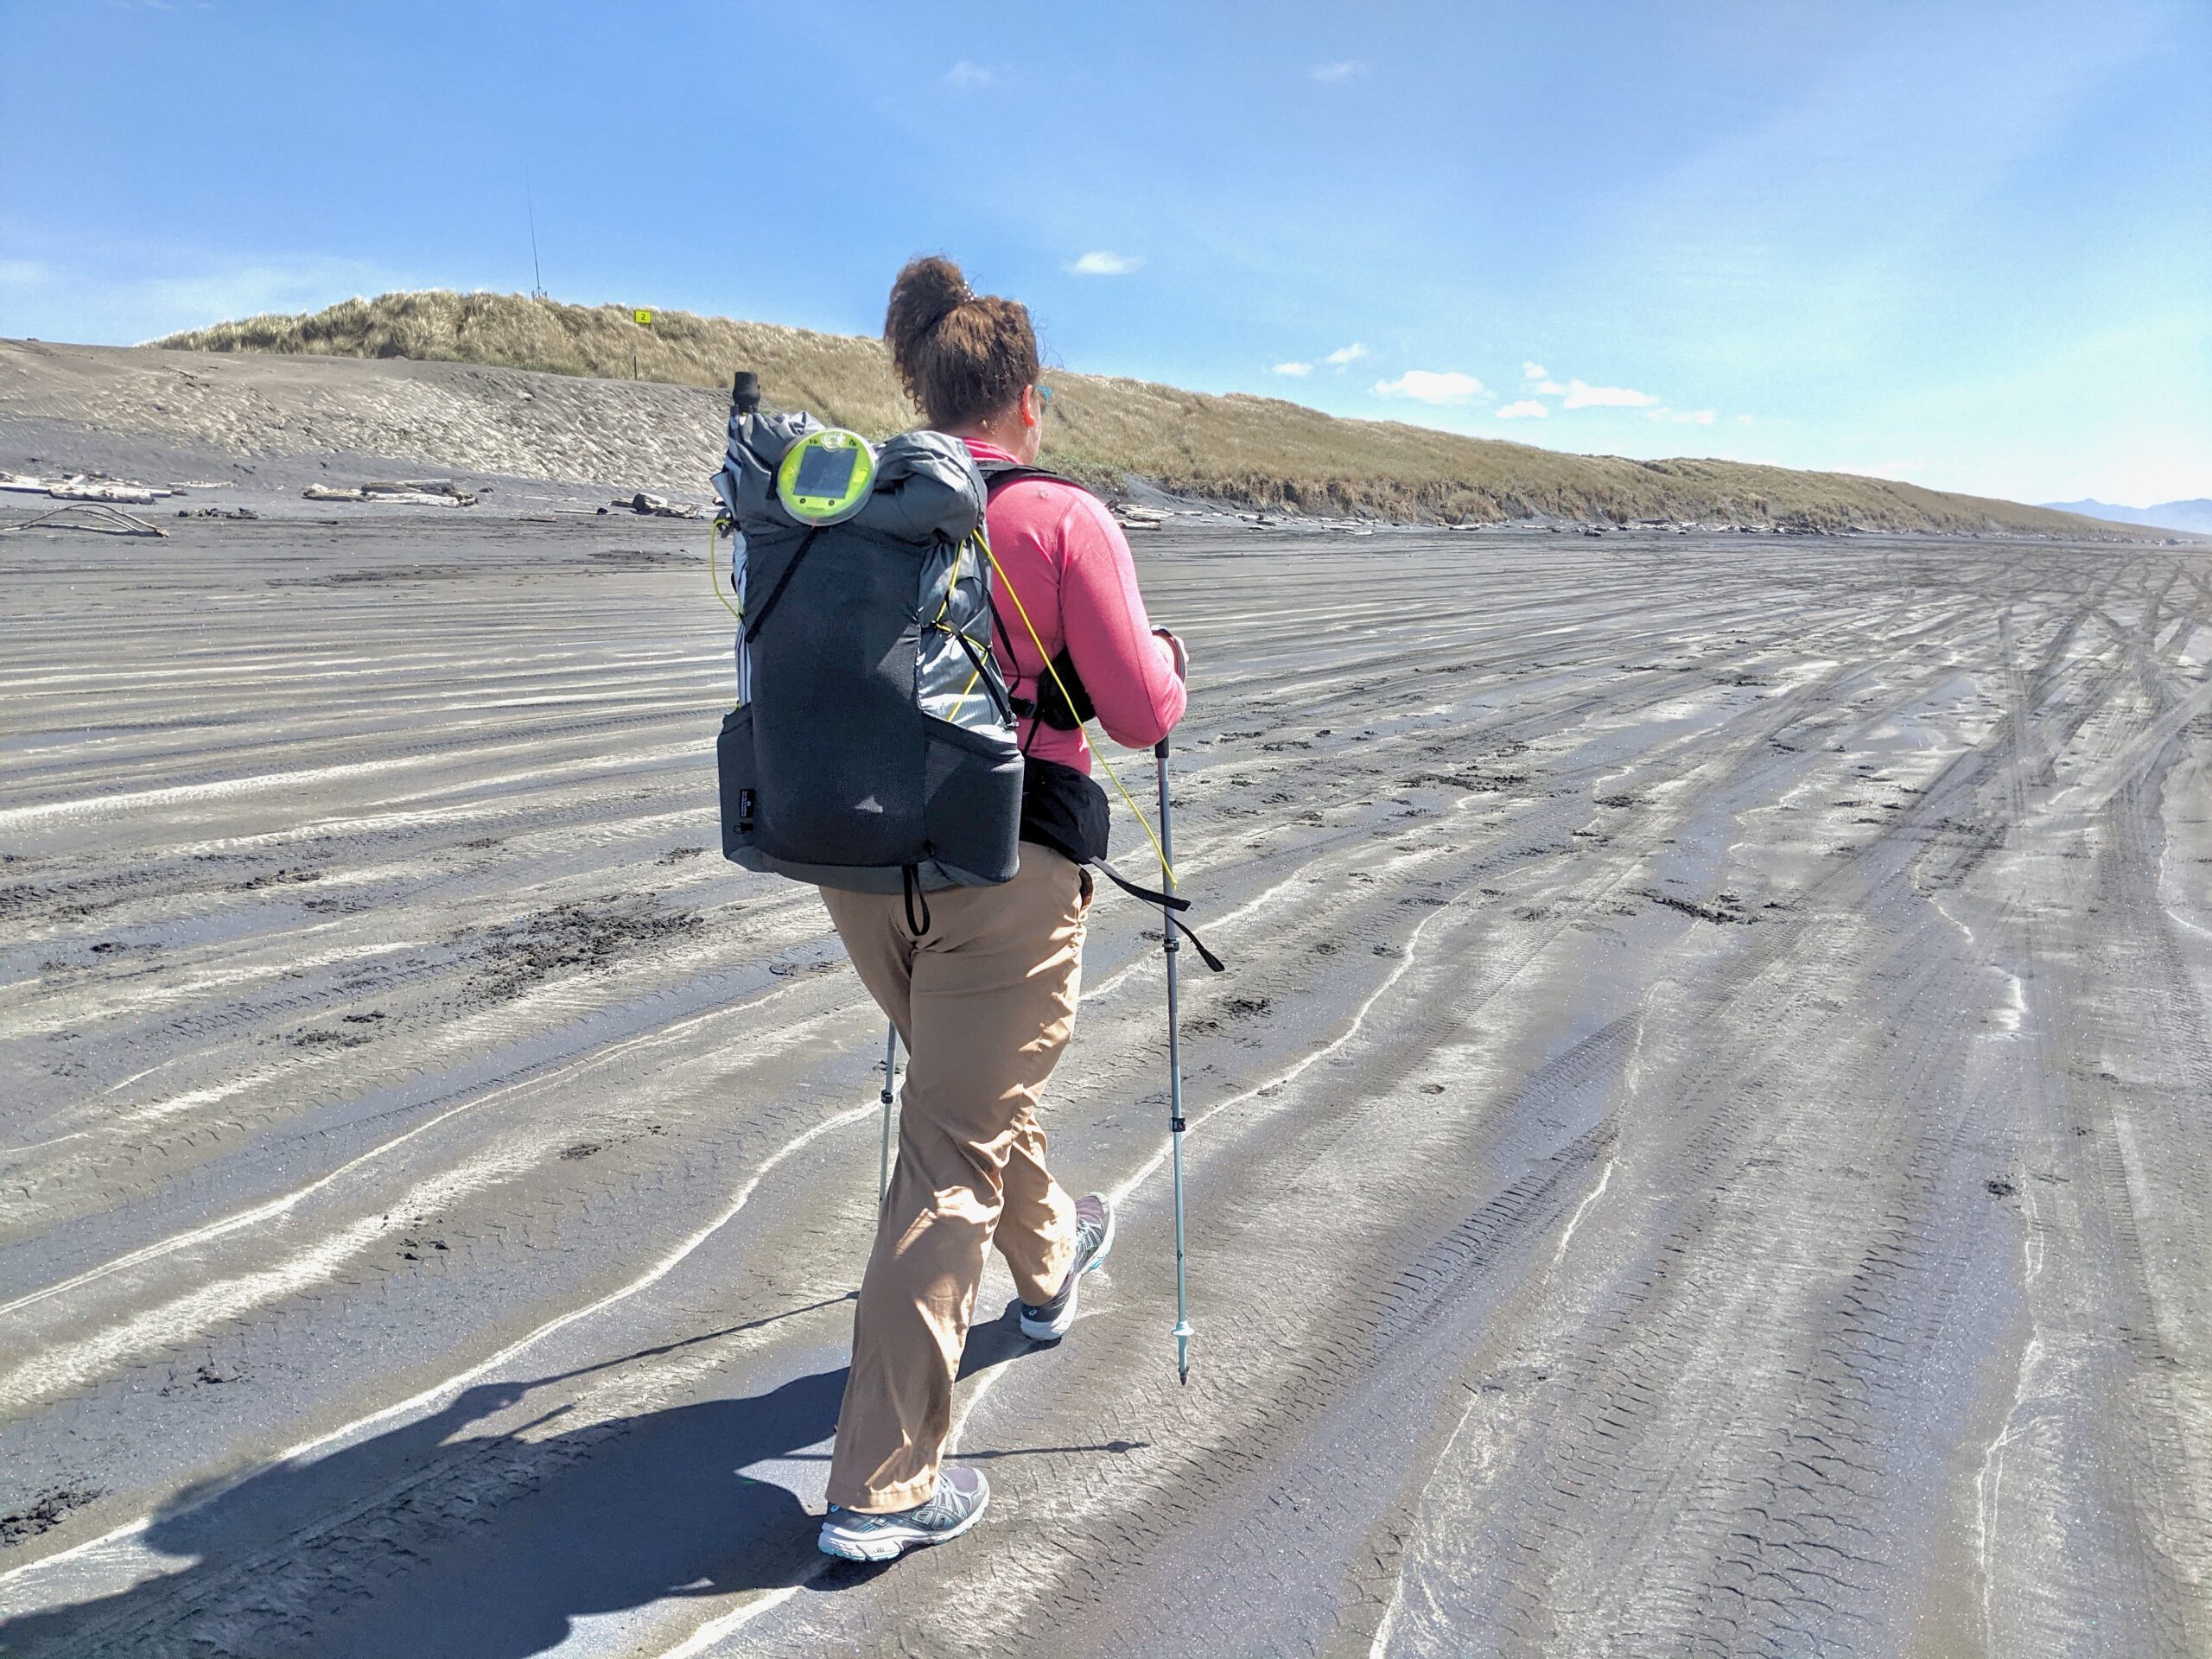 Despite having only carried traditional backpacking backpacks, Diana was extremely impressed with the load-bearing ability of the minimalist Six Moons Designs Swift X with the running-vest style straps.